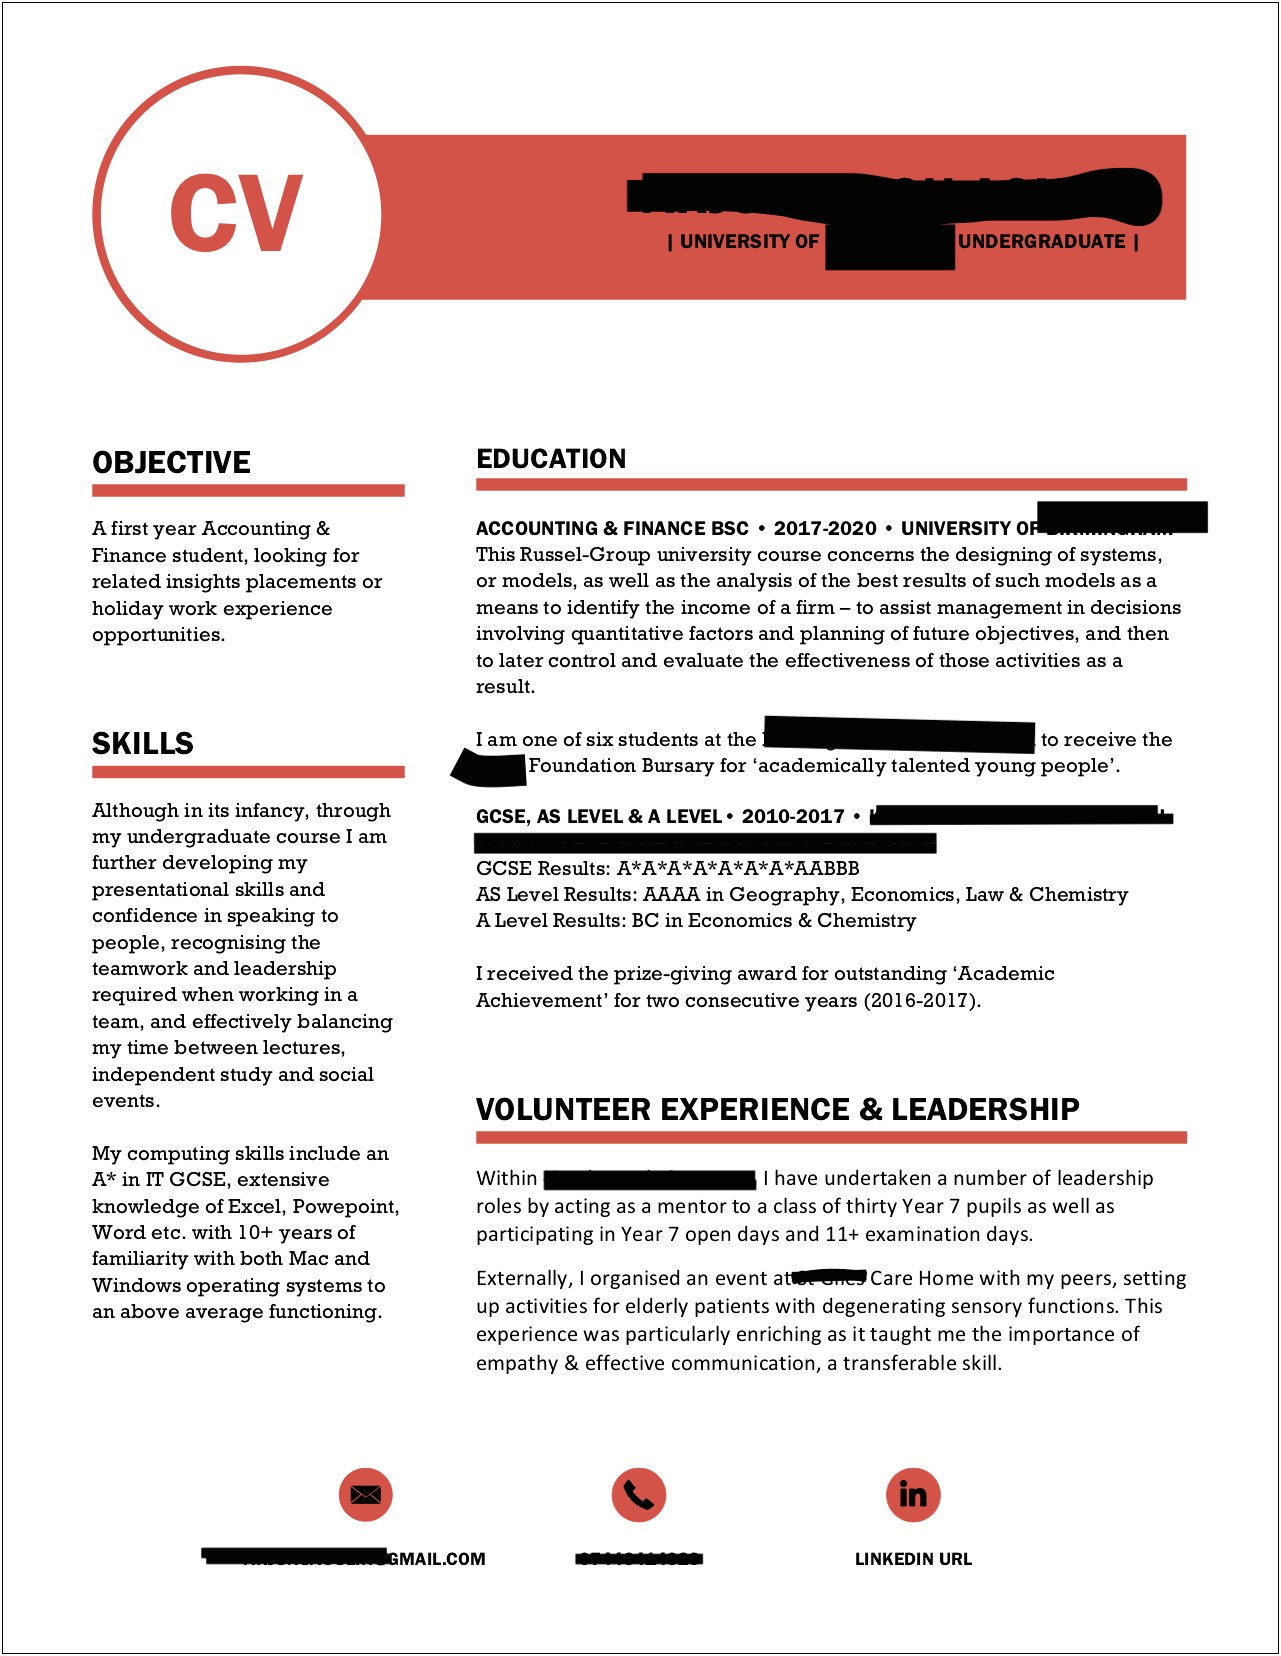 Resume After 20 Years In Same Job